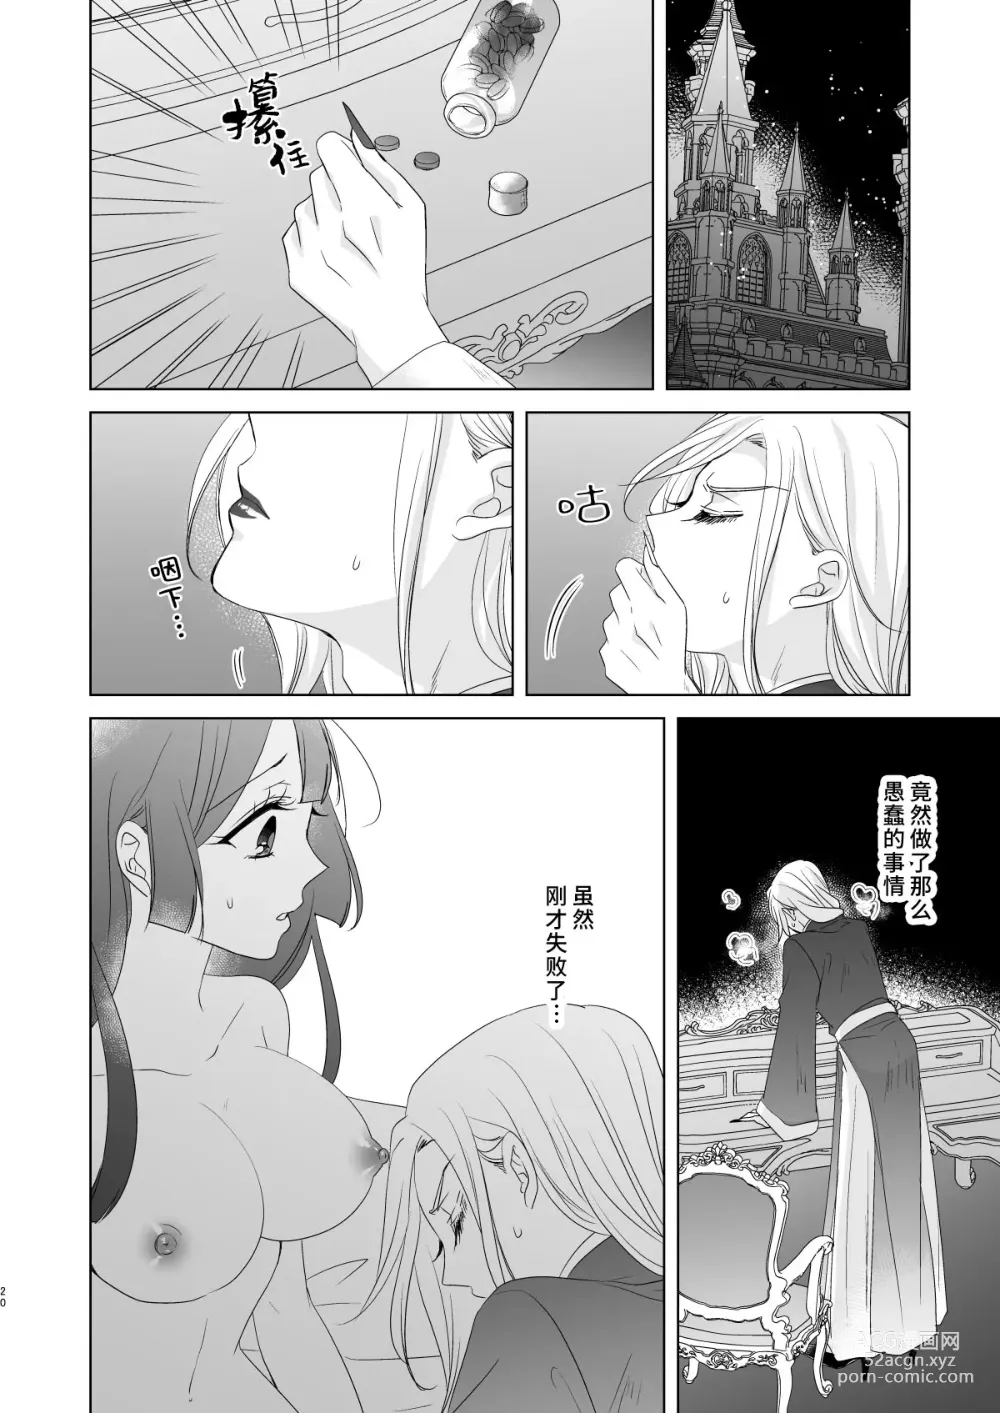 Page 19 of doujinshi 男大姐♂吸血鬼和少女